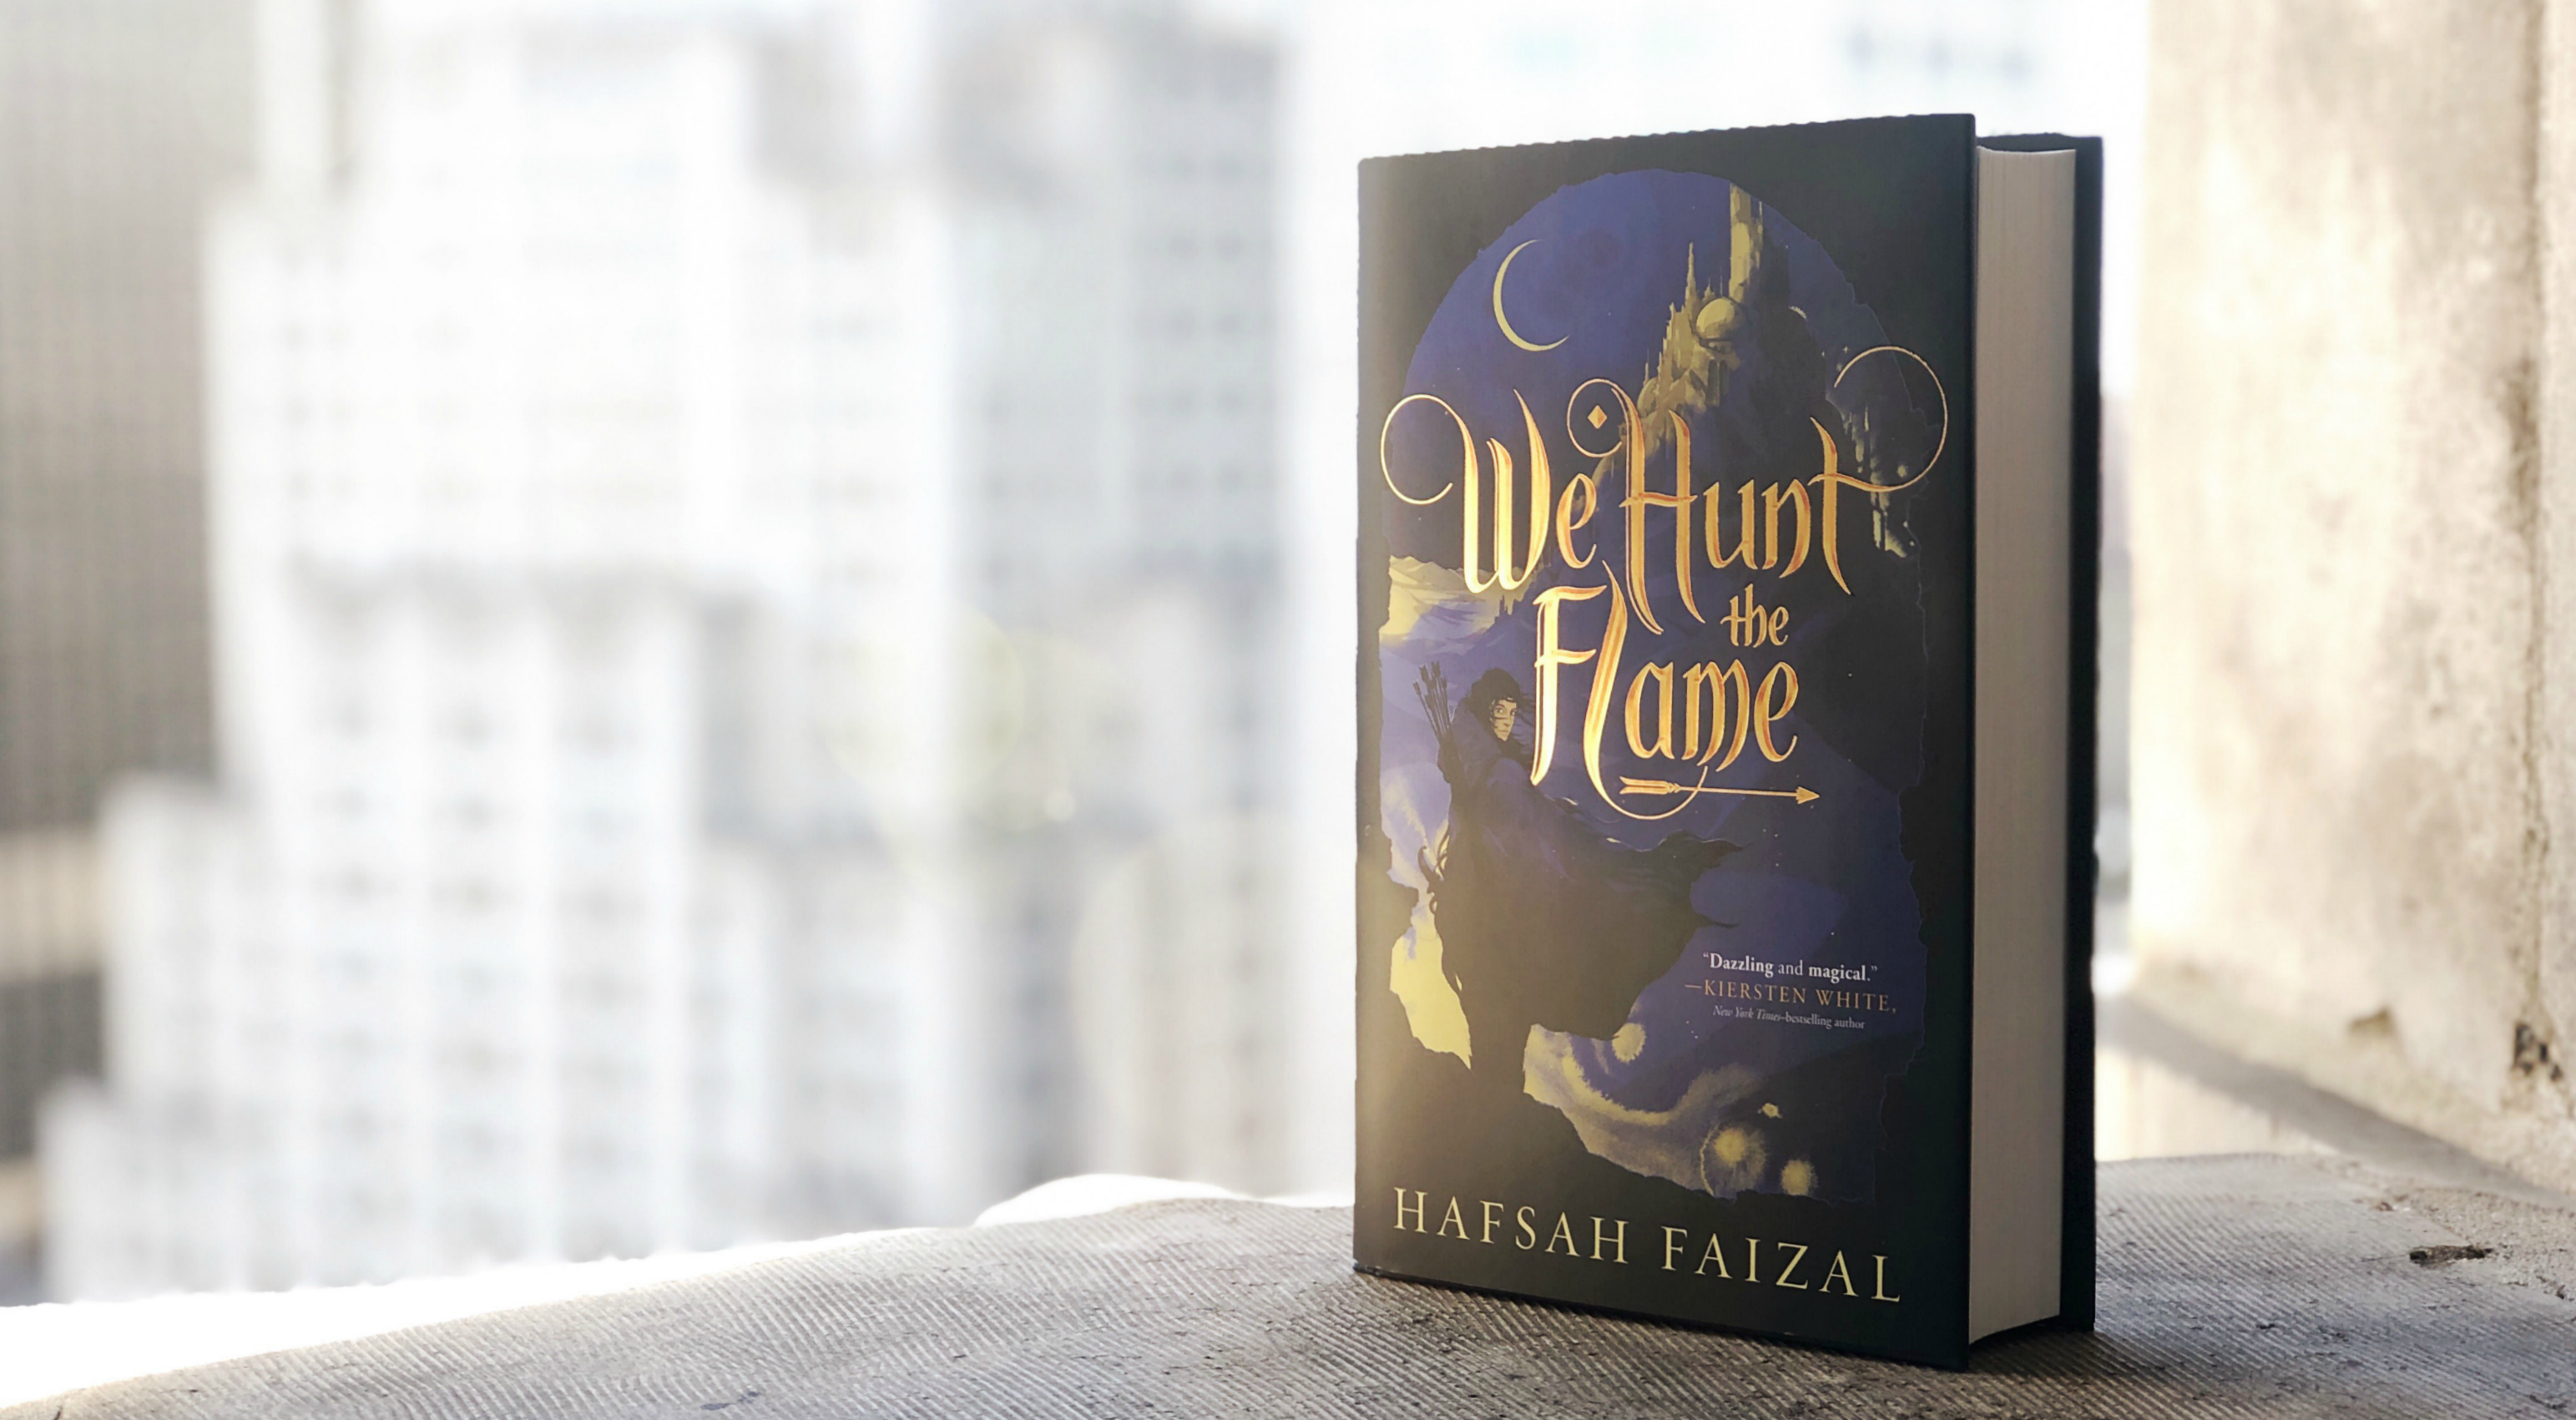 An Interview With Hafsah Faizal, Author of We Hunt the Flame